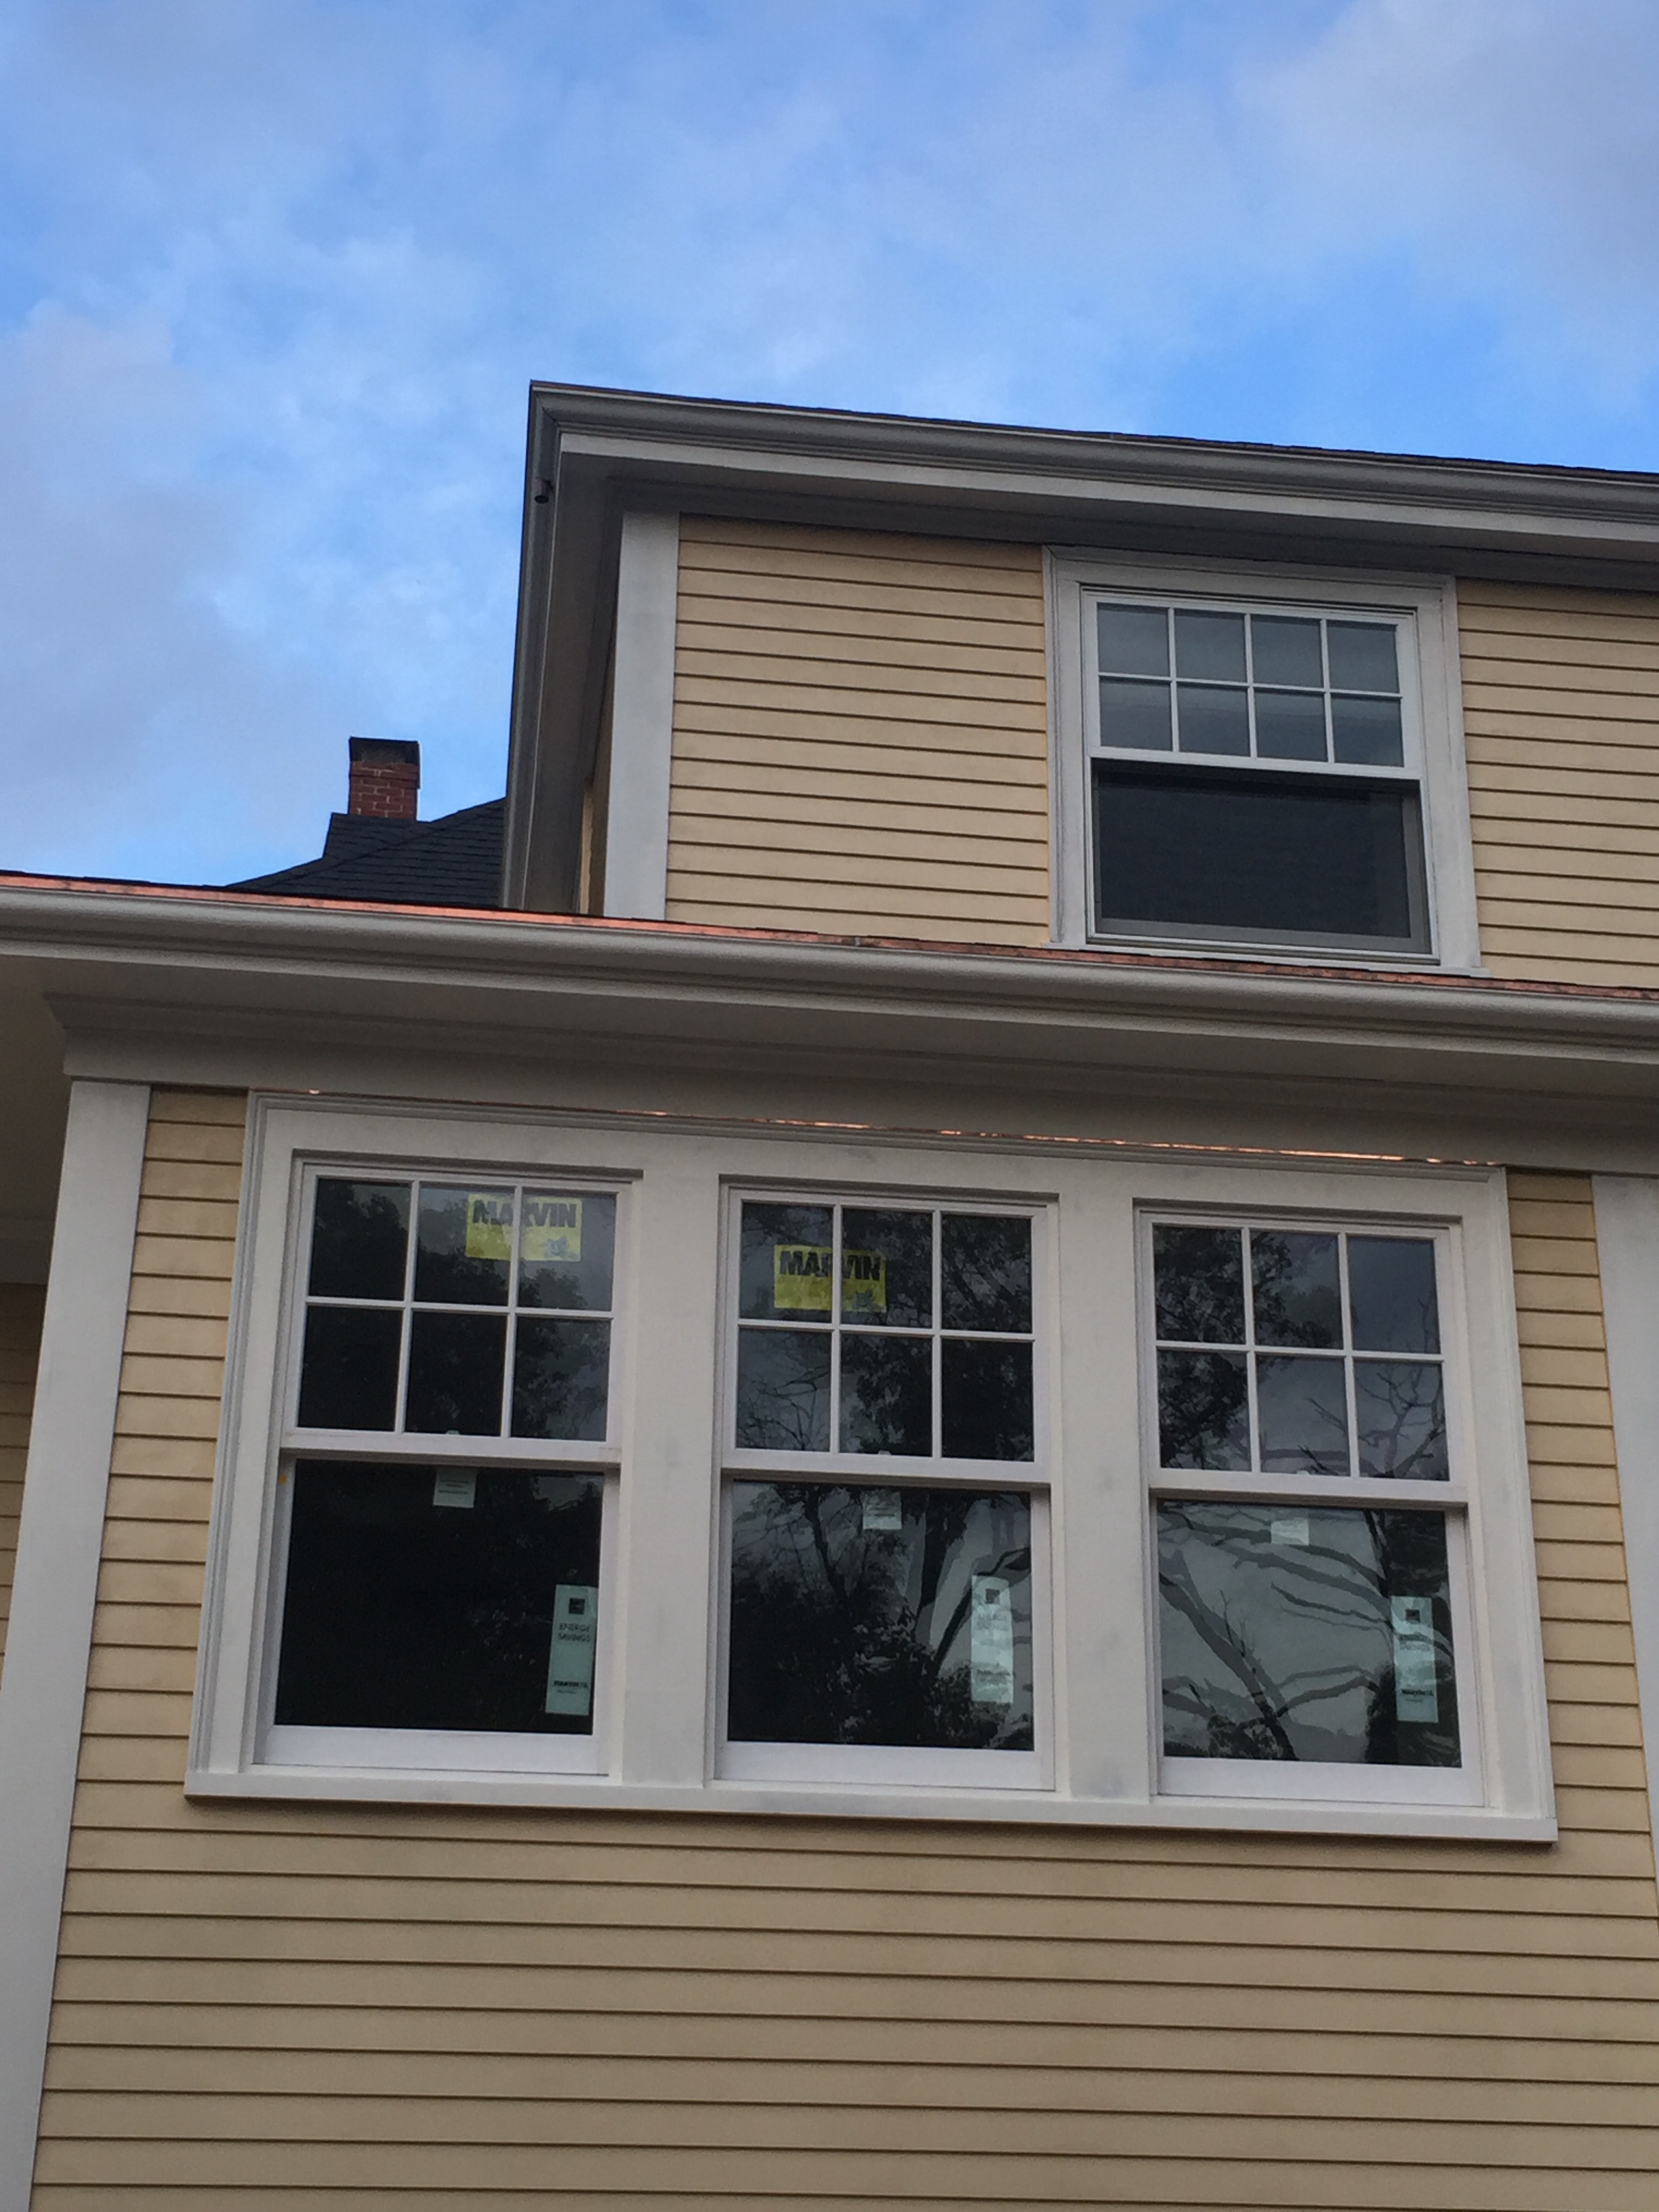 Day 196: Project 1896 (Our Home Renovation) - Major Progress & Minor Adjustments